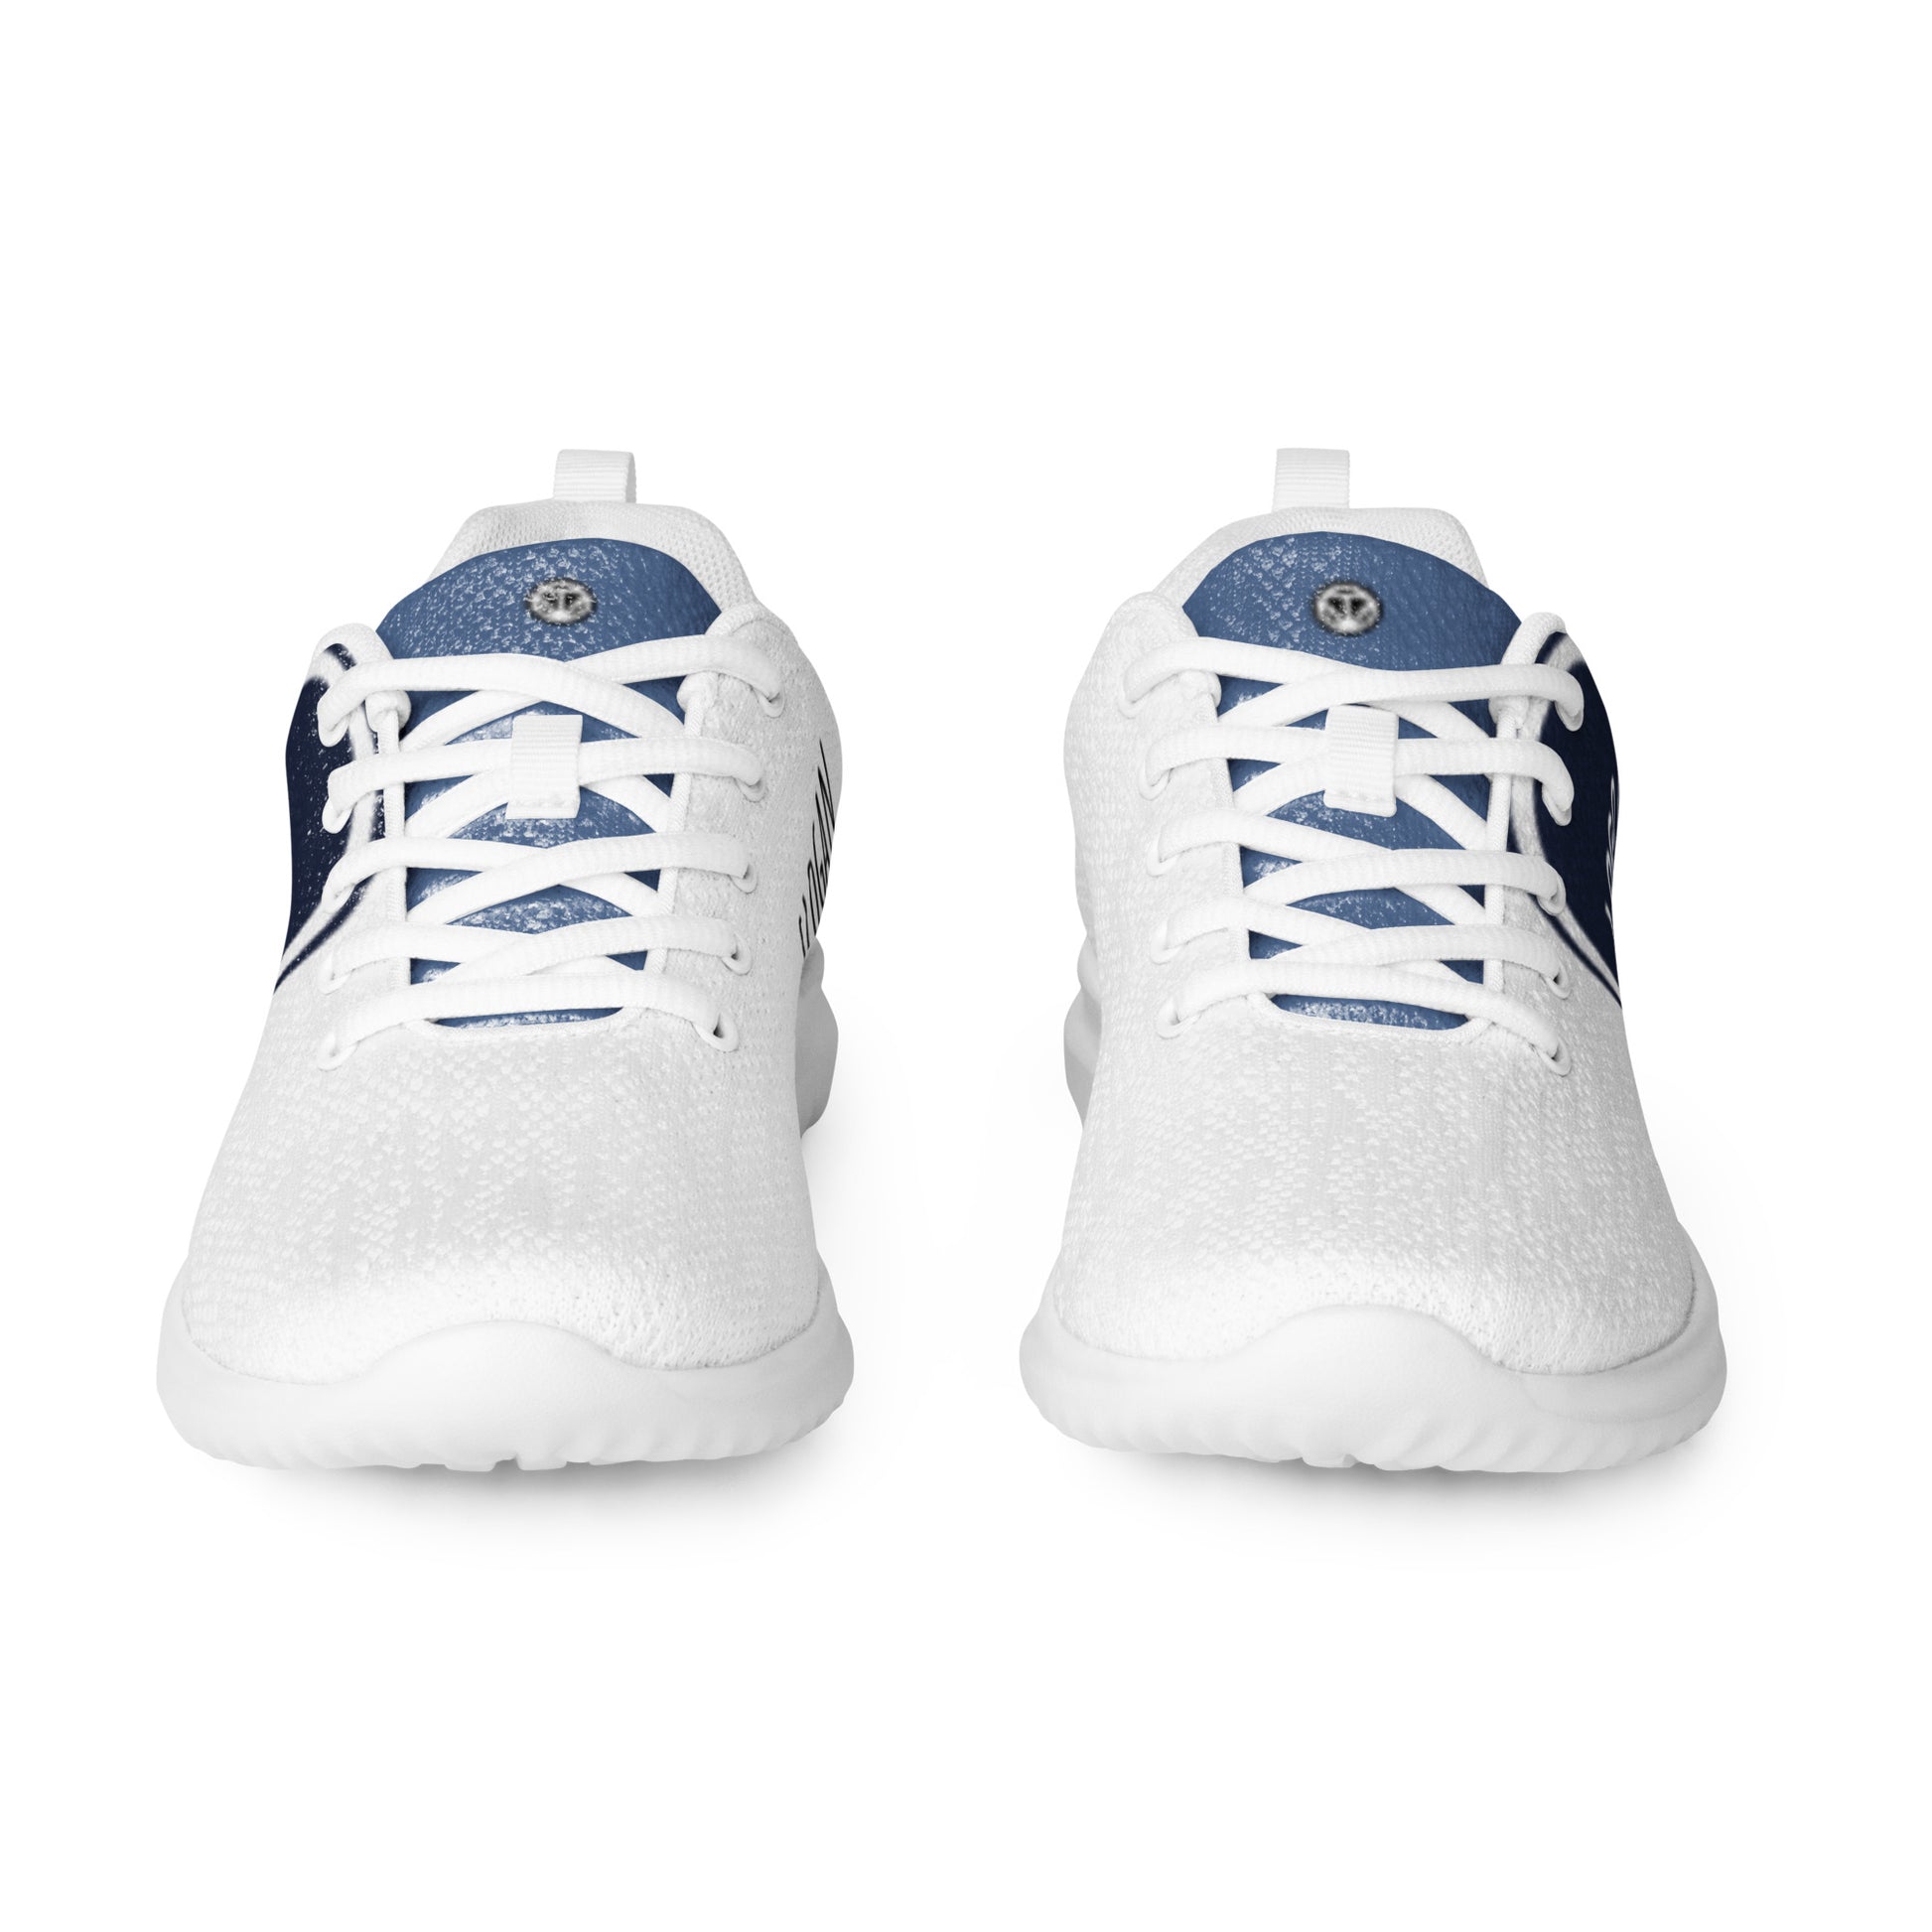 TIME OF VIBES - Women’s athletic shoes CORPORATE - €89.00